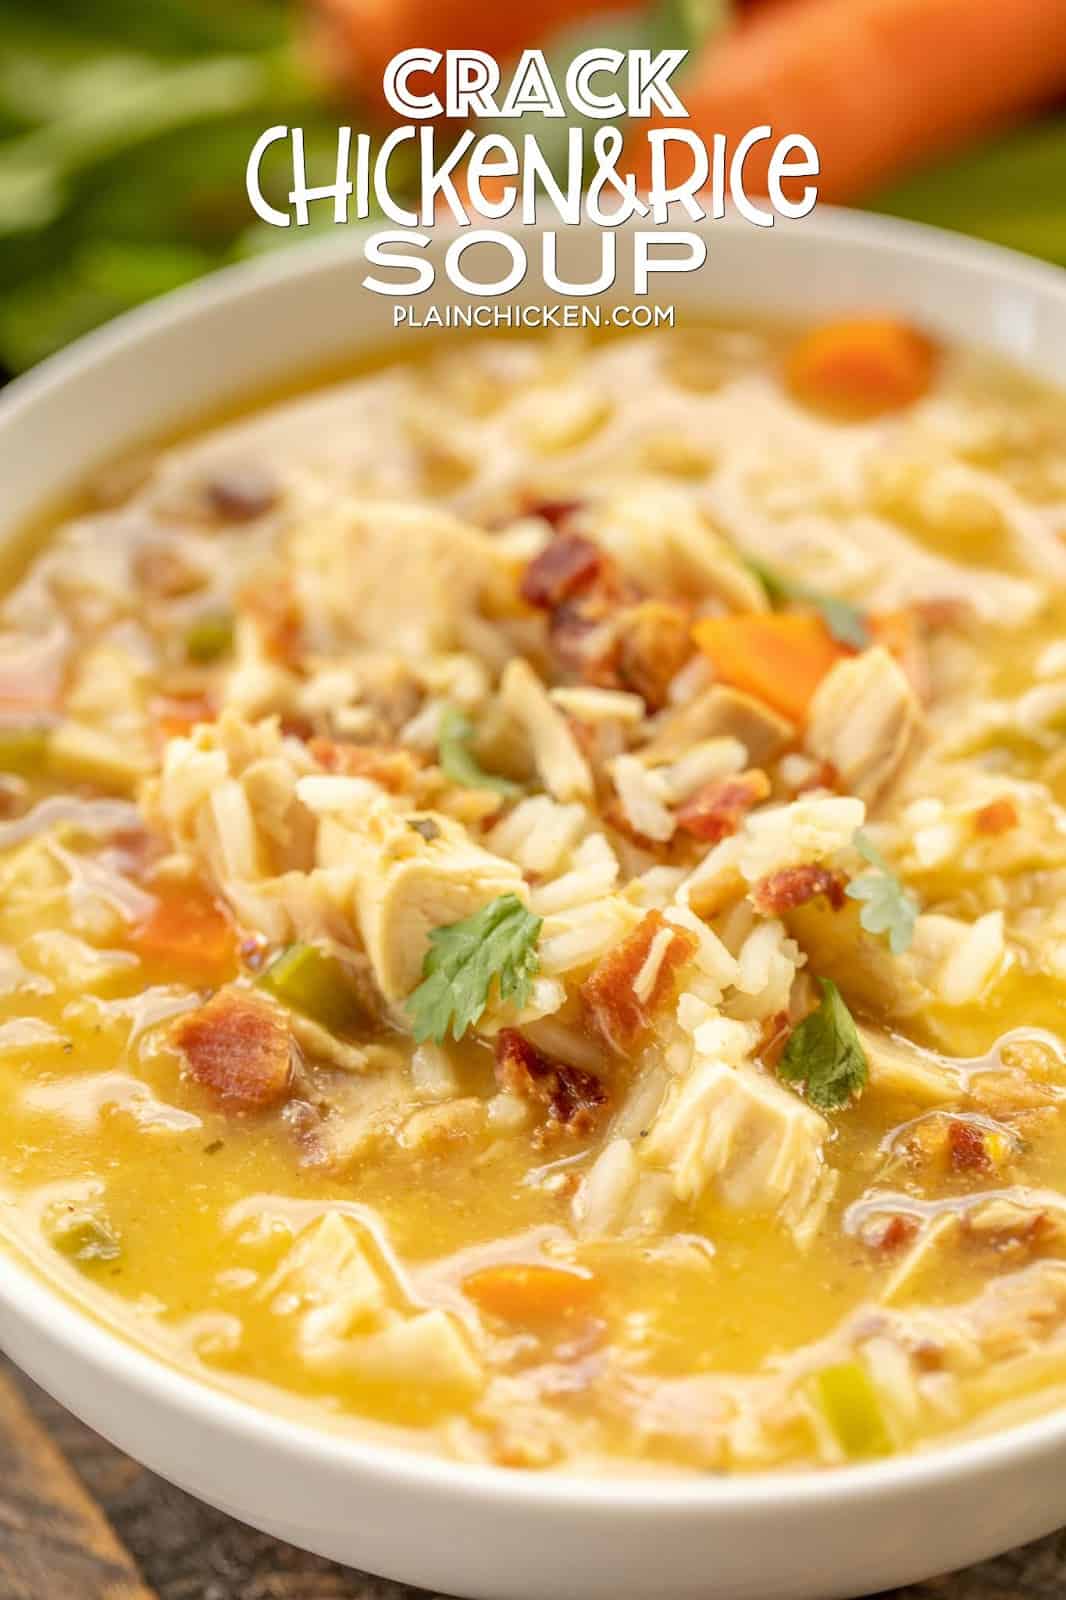 Crack Chicken and Rice Soup - this soup should come with a warning label! SO GOOD!!! Ready in 30 minutes! Chicken, cheese soup, chicken broth, celery, carrots, ranch mix, bacon, and rice. Everyone went back for seconds - even our super picky eaters! A great kid-friendly dinner!! We love this soup! #soup #bacon #chickenandricesoup #crackchicken